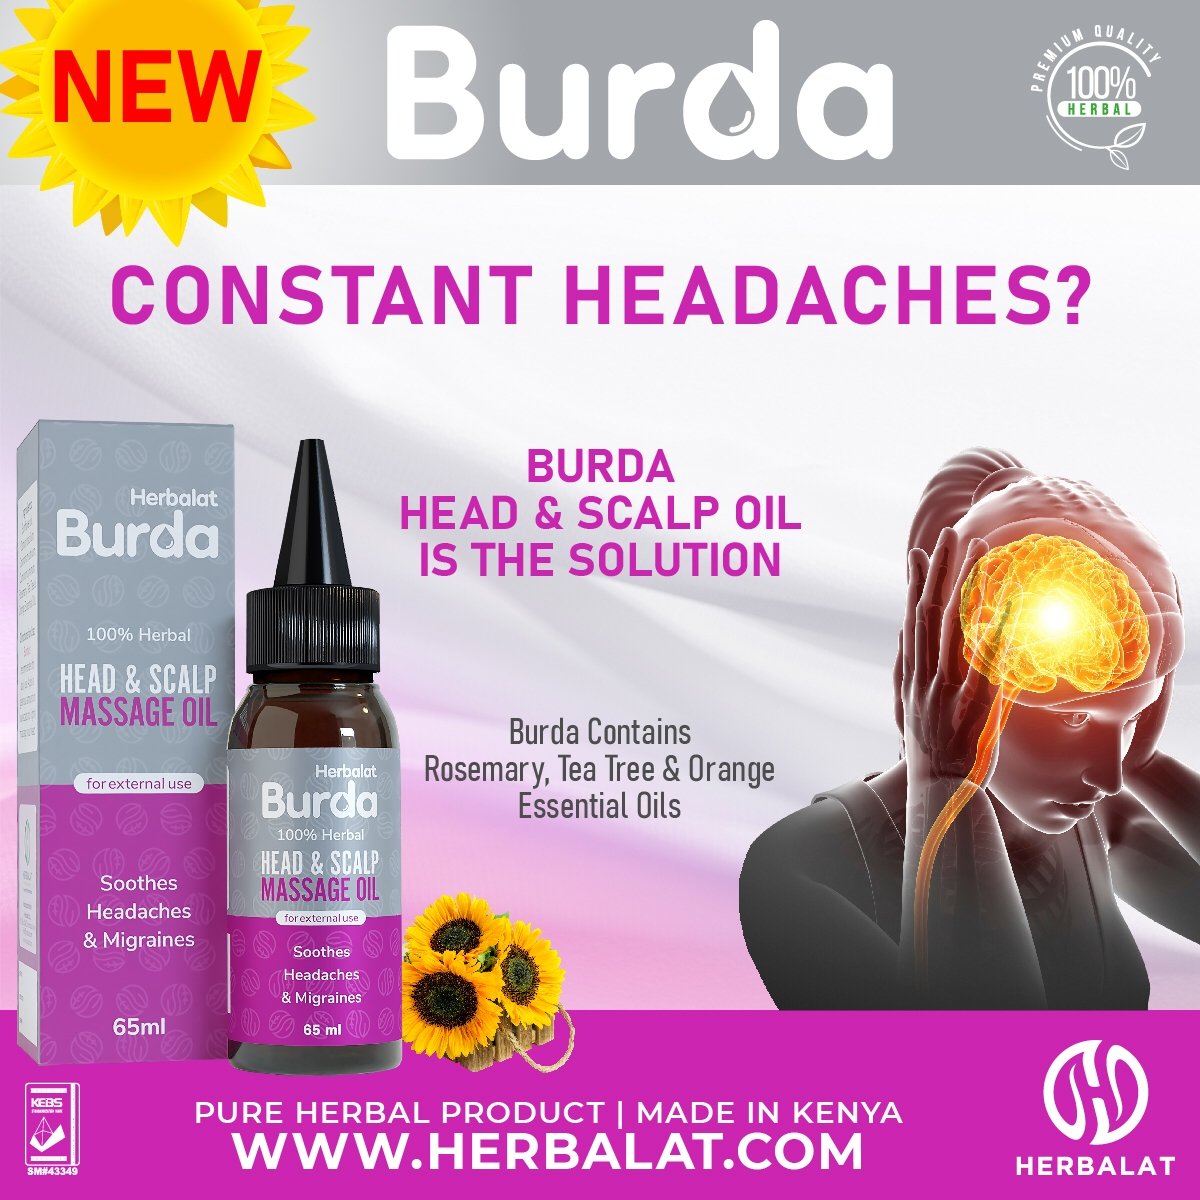 It's the weekend and with many things happening at once, everyone is prone to unnecessary headaches. We present you Burda to help you enjoy the needed break weekend provides. #naturaloils #essentialoils #natural #herbalife